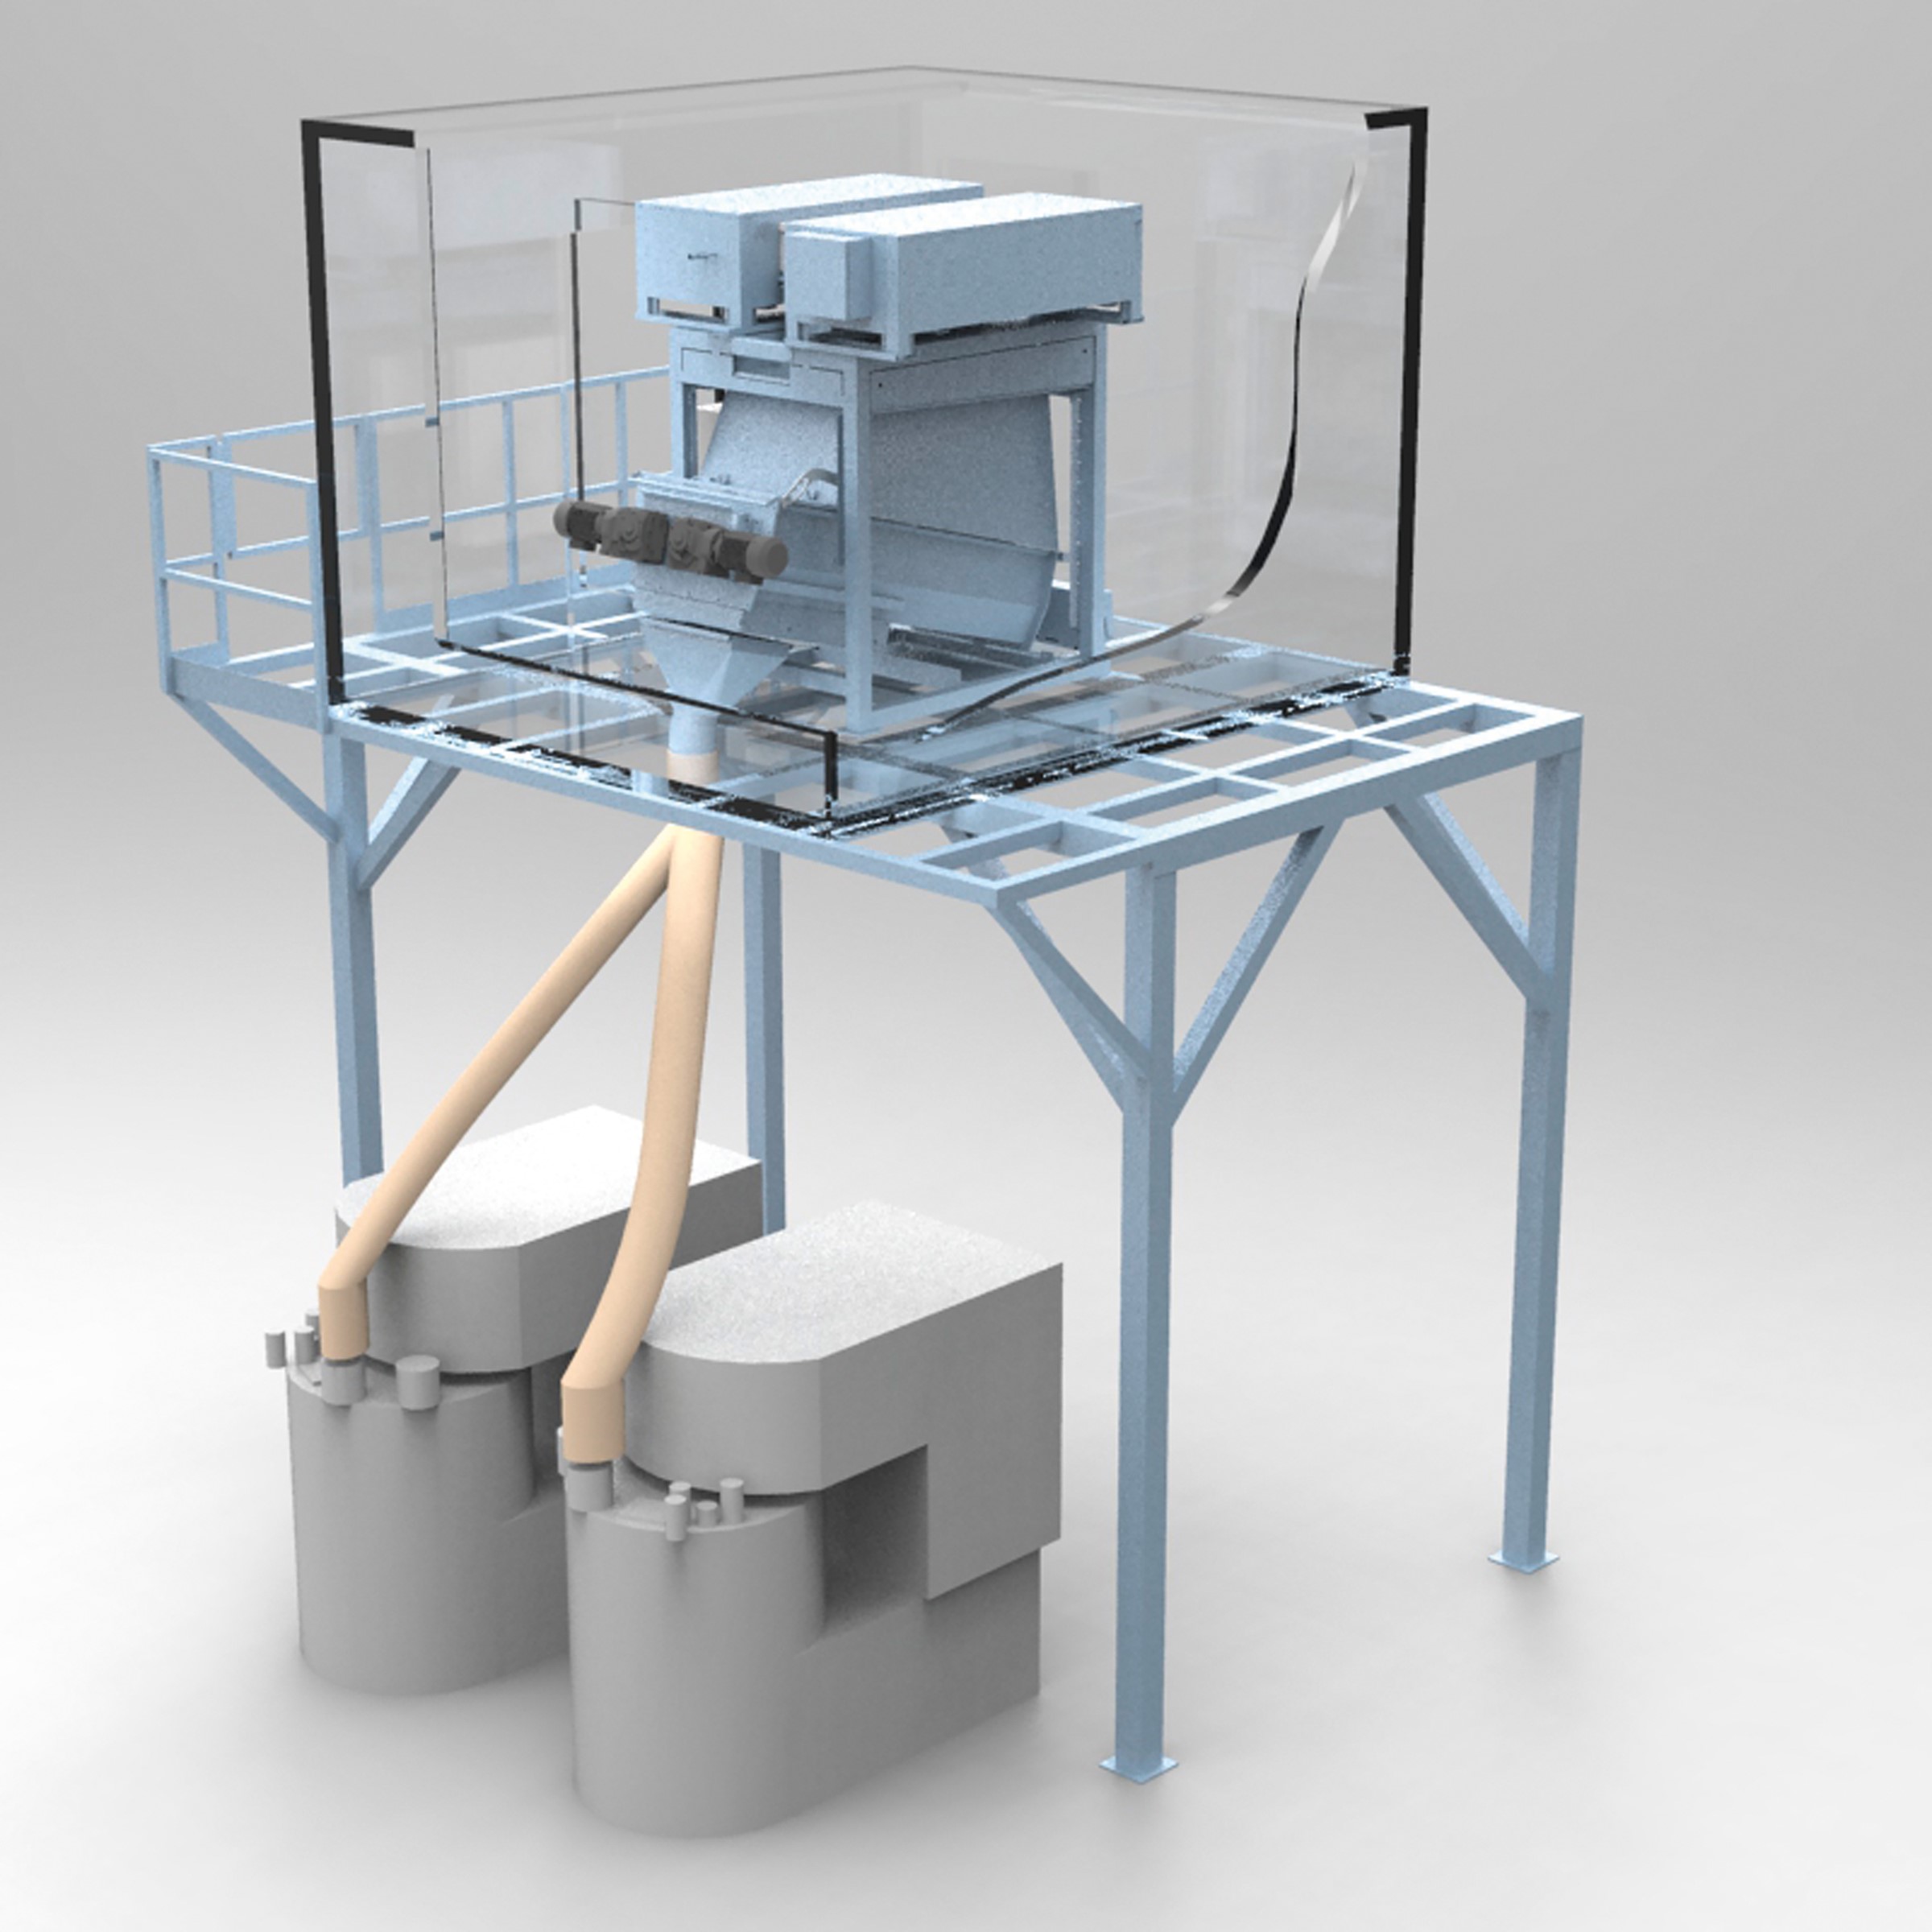 MAJA VS5 ice batching solution for industrial dough production